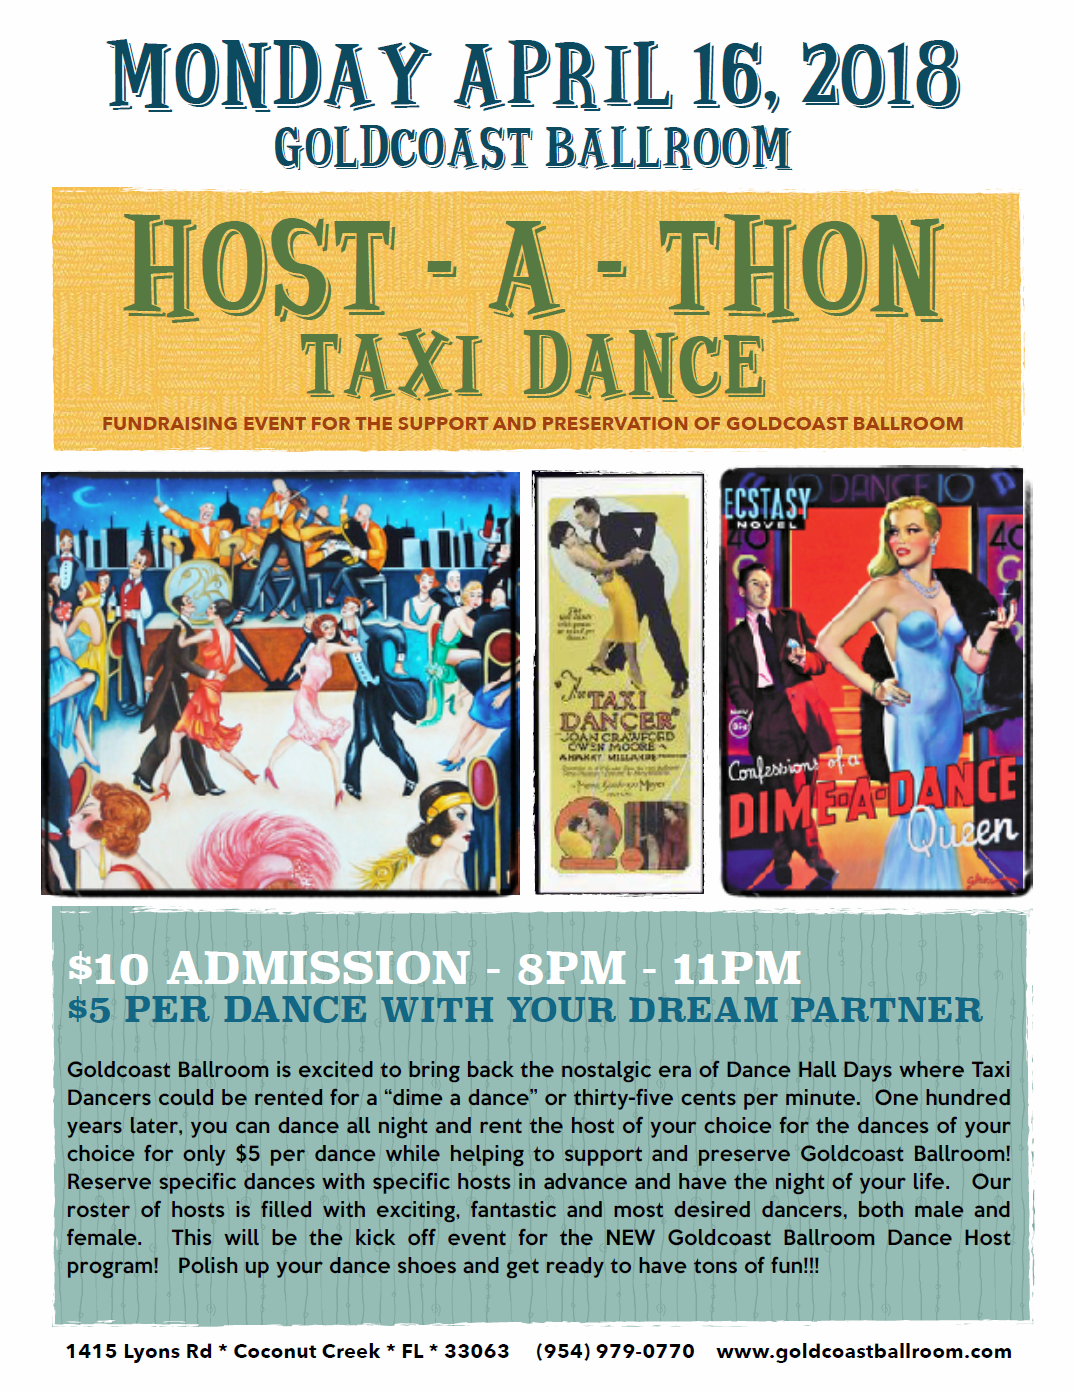 Special Host-a-thon Taxi Dance Party & Fundraiser! - April 16, 2018